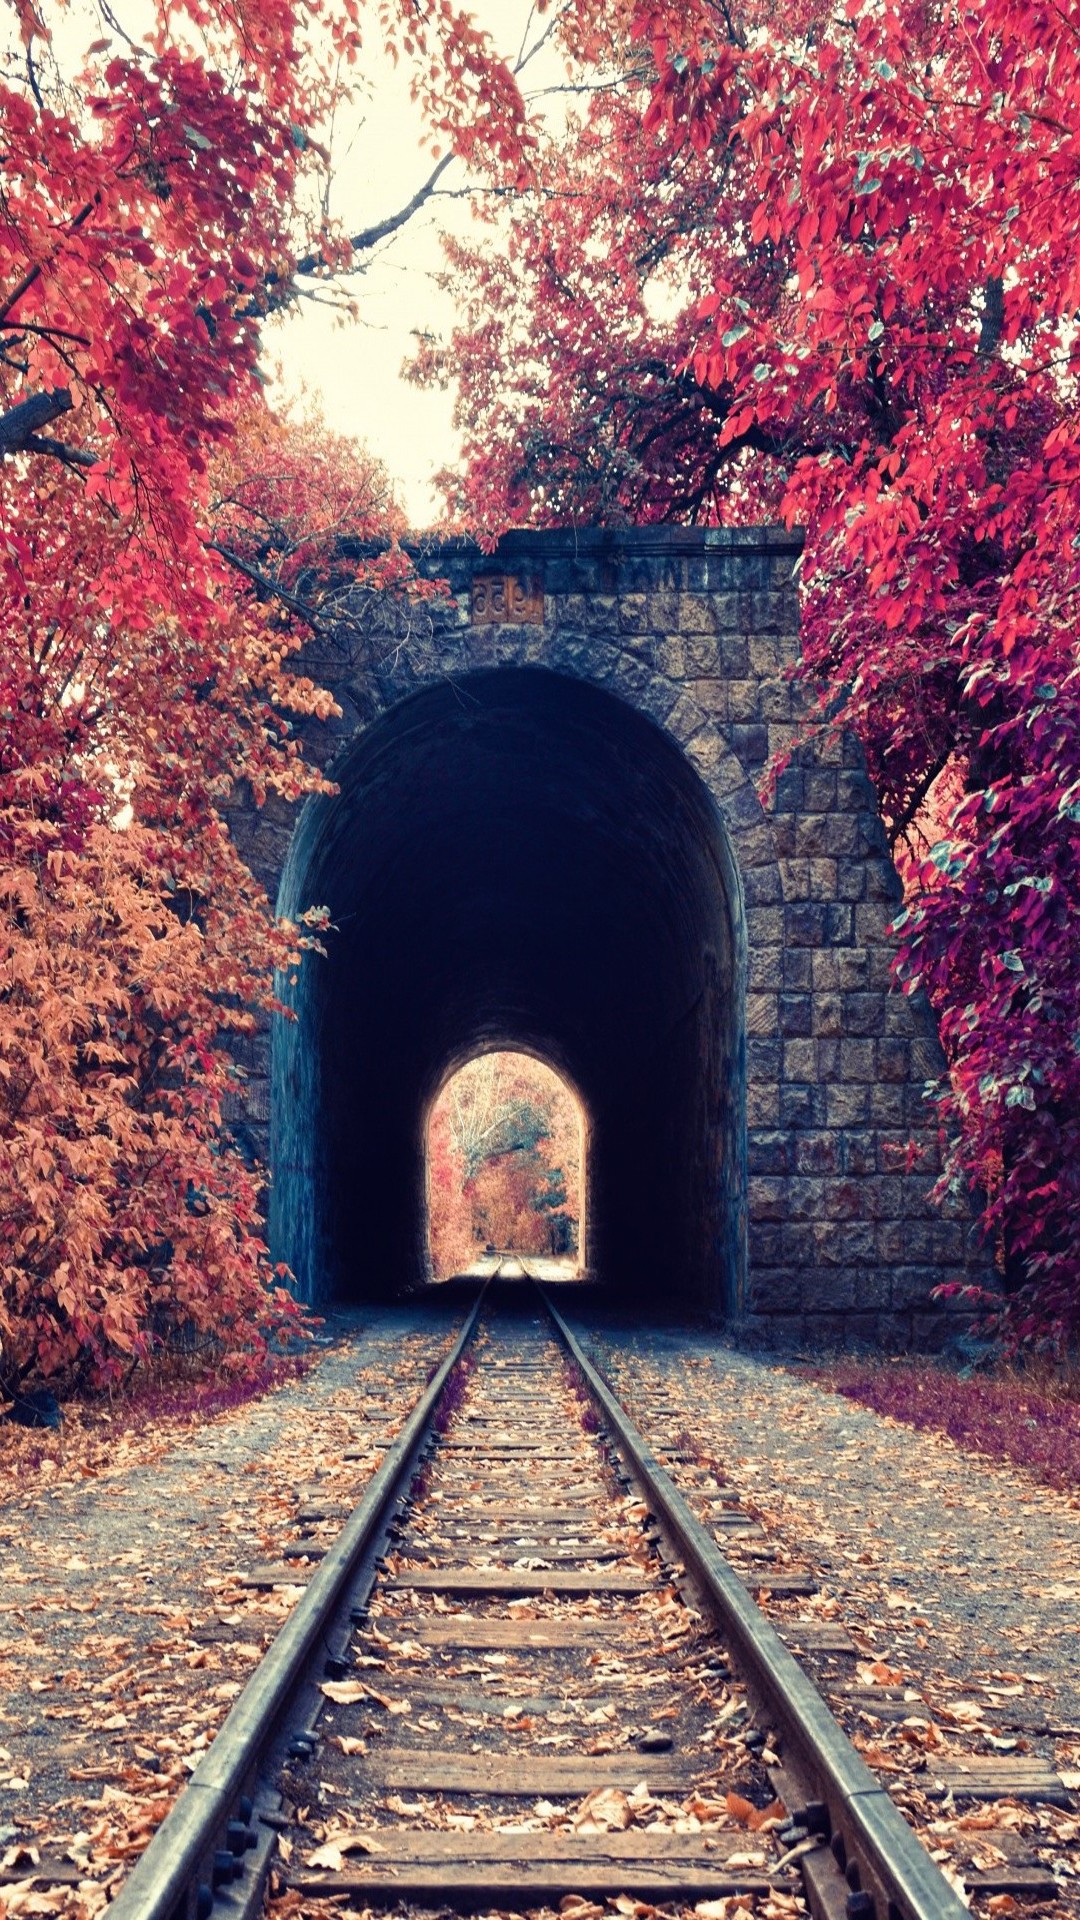 portrait Display, Nature, Trees, Fall, Leaves, Railway, Tunnel, Red